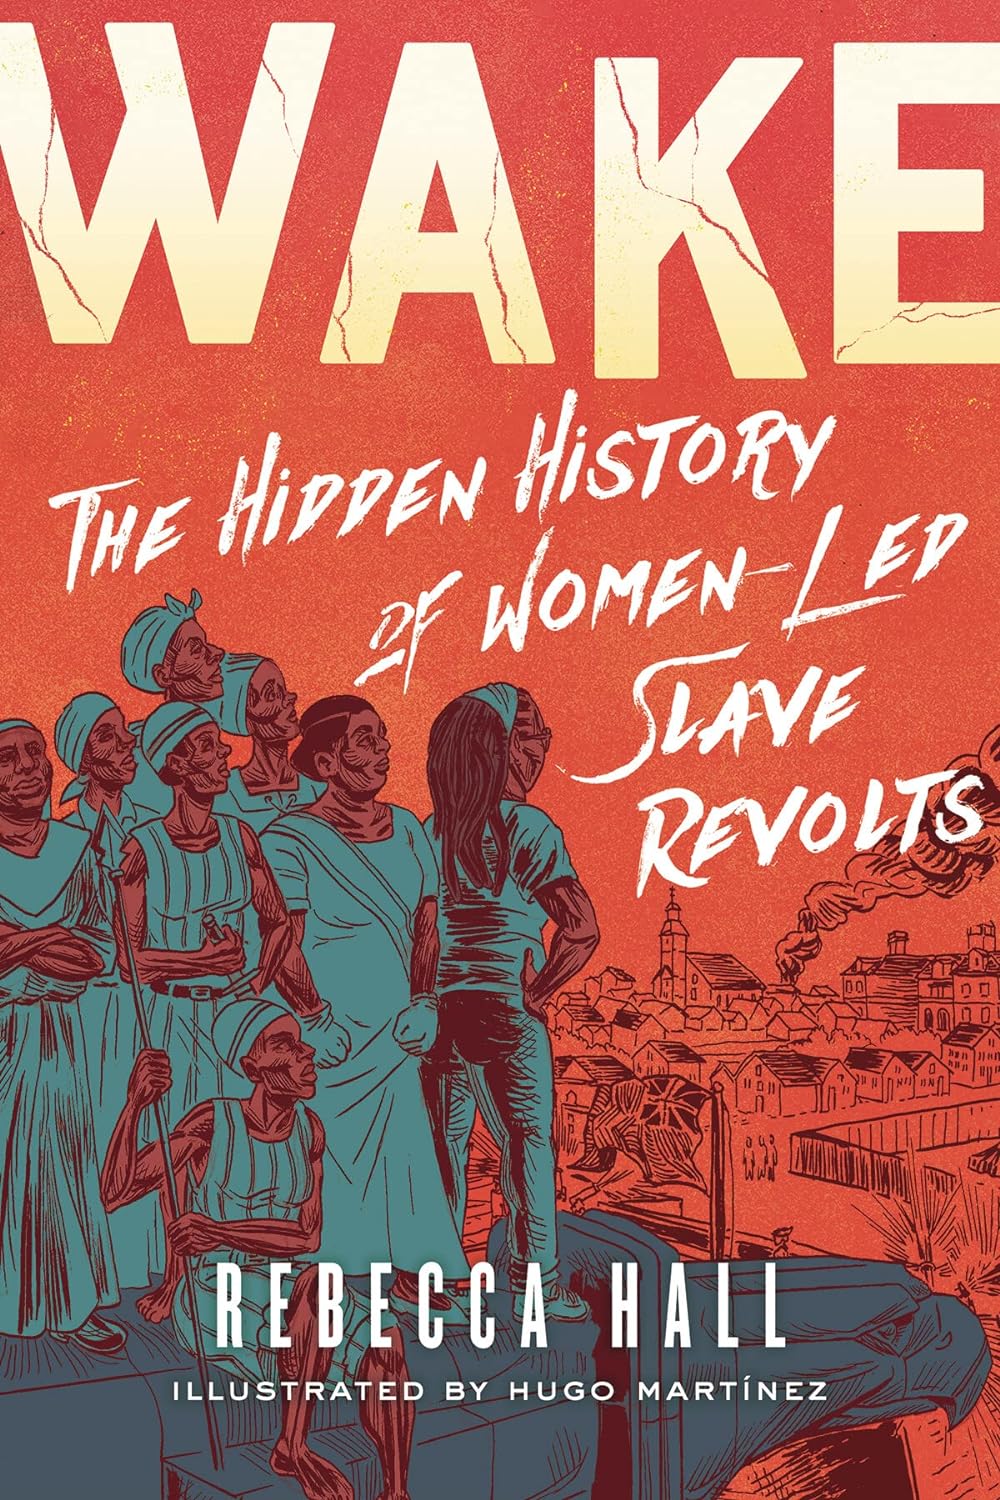 Wake The Hidden History of Women-Led Slave Revolts by Rebecca Hall